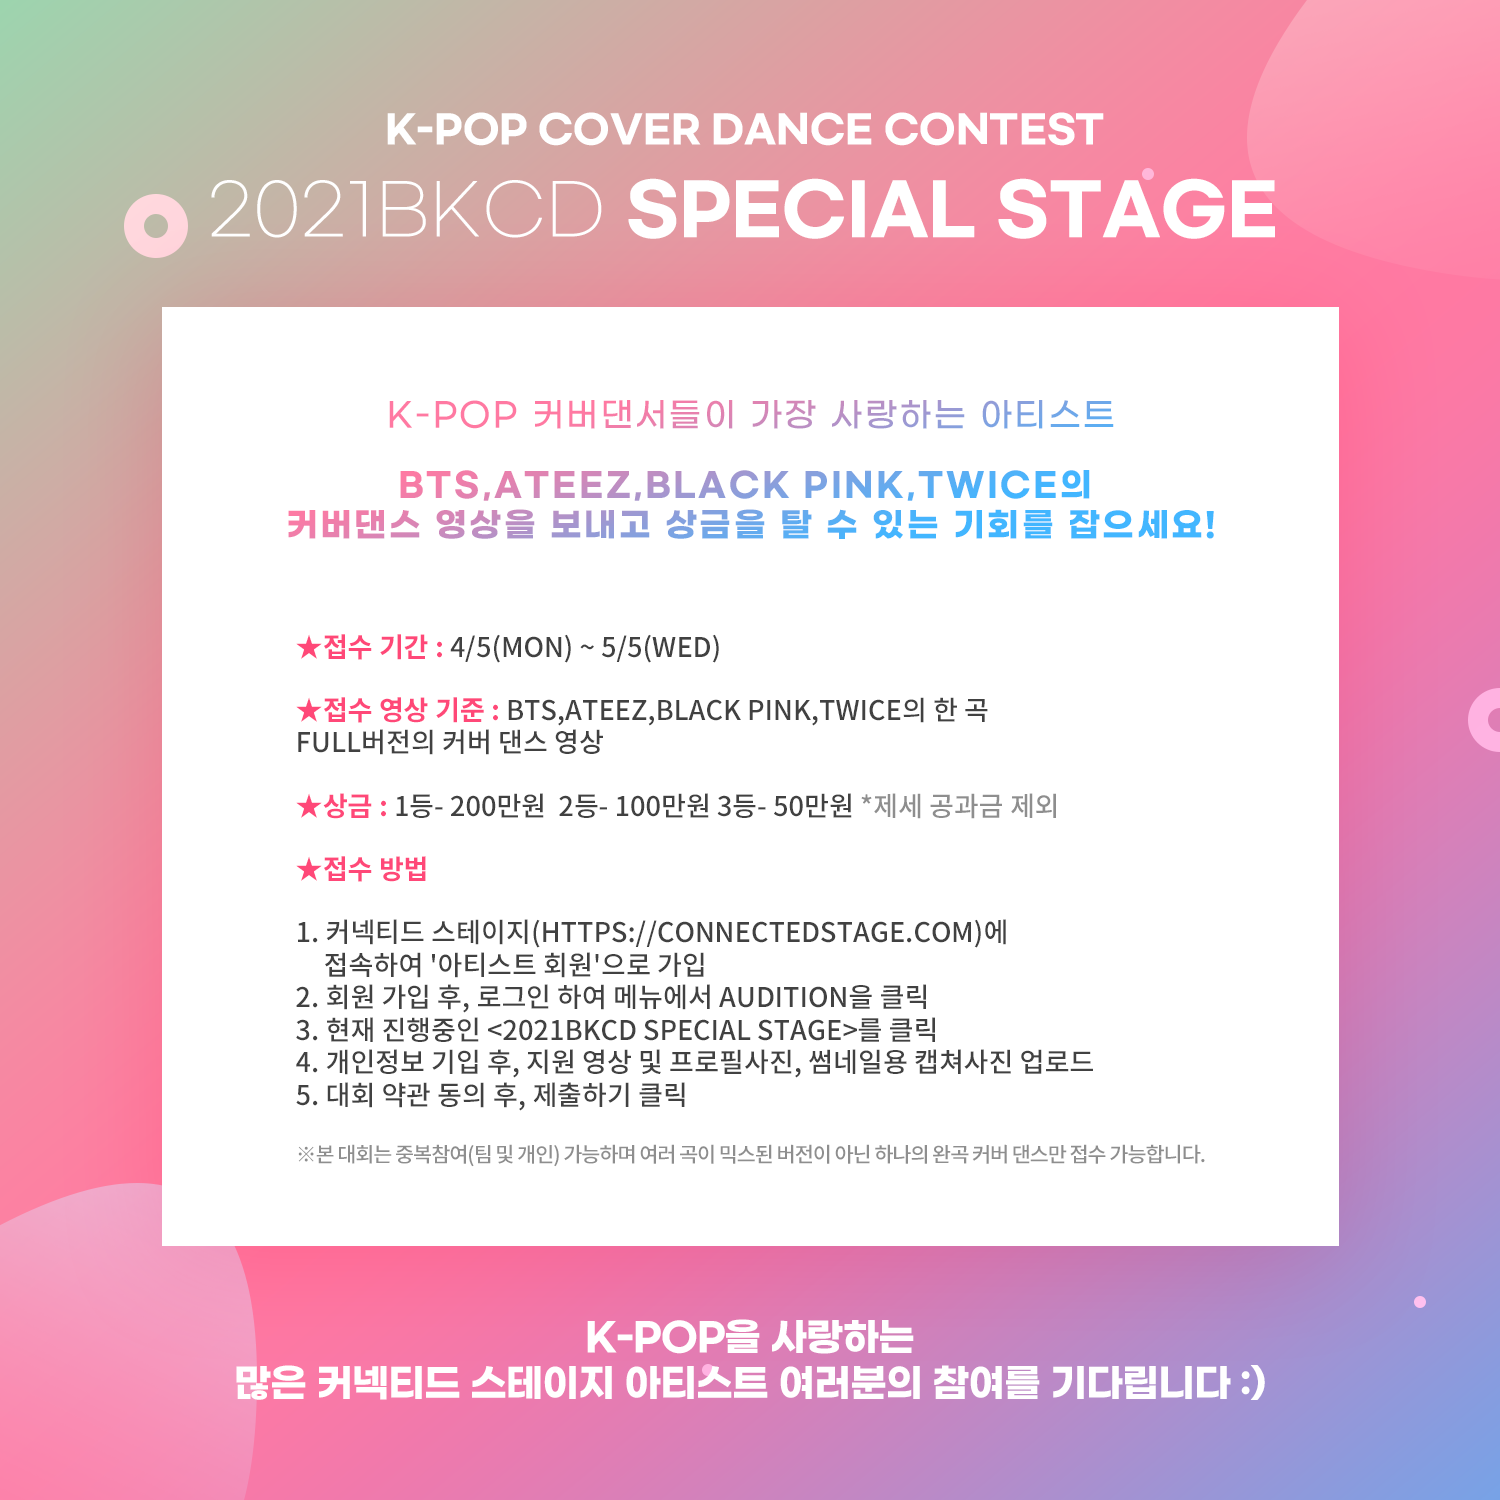 <2021BKCD Special Stage>KPOP COVER DANCE CONTEST